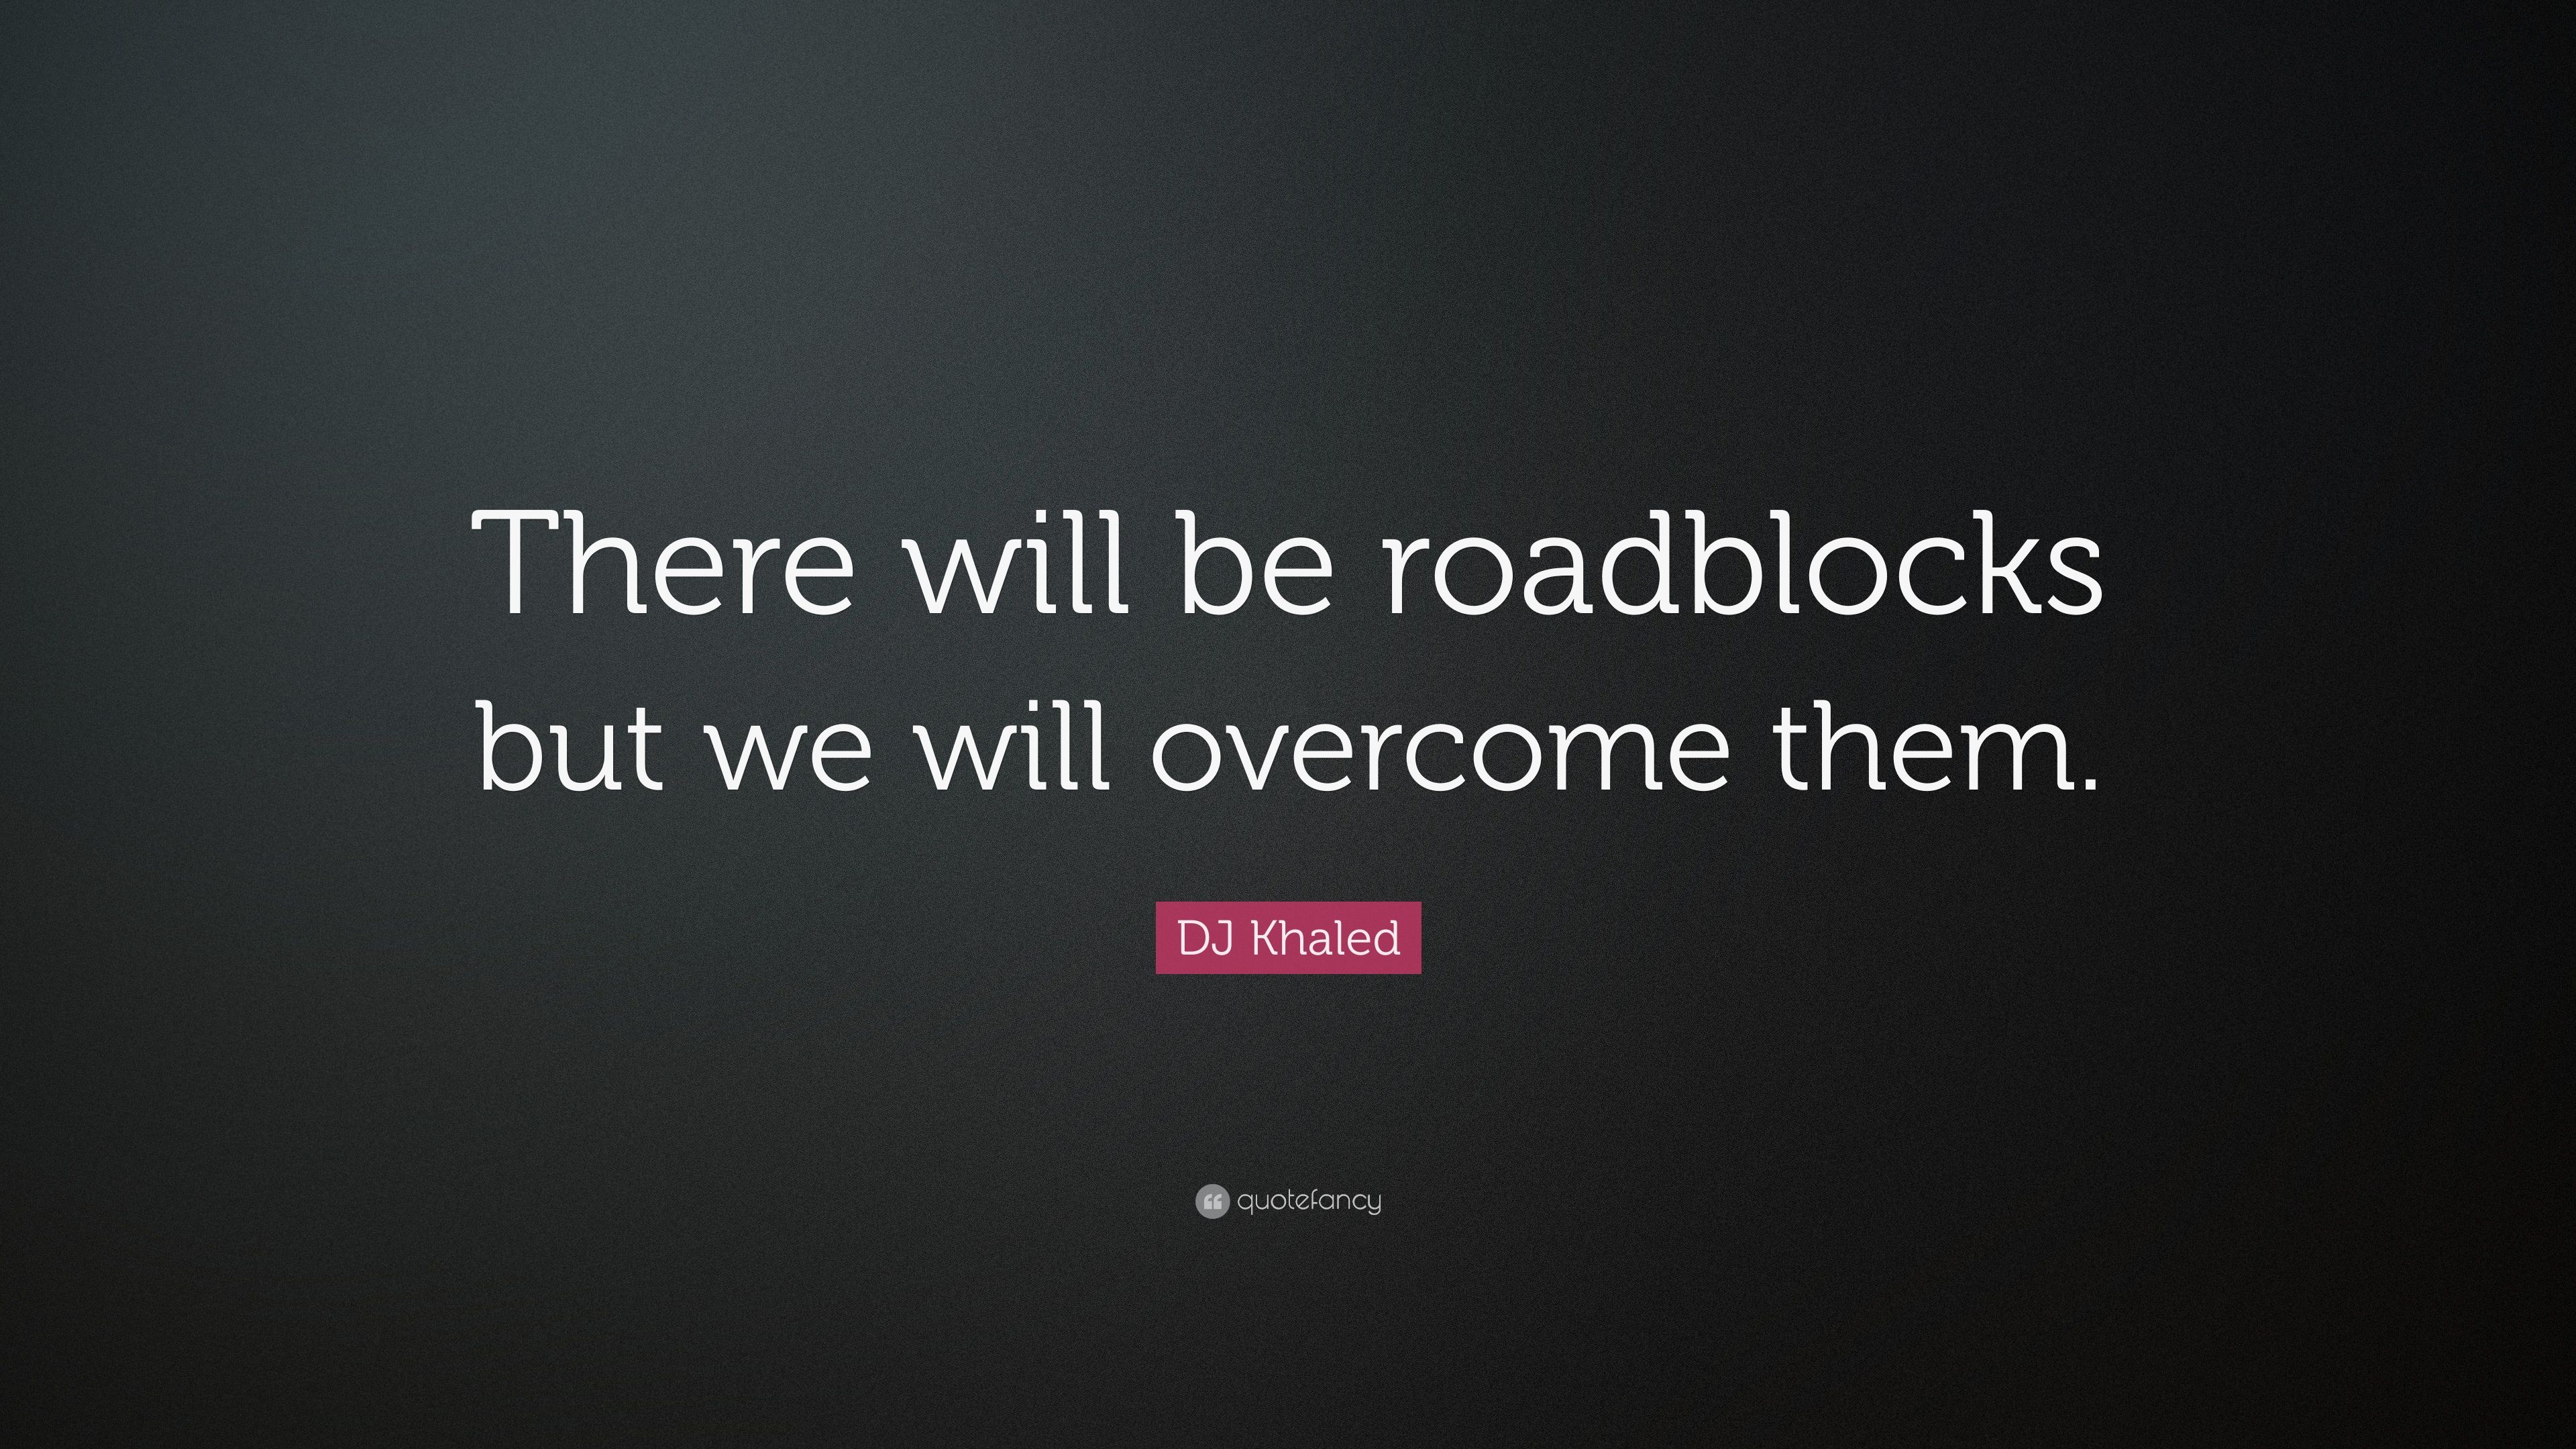 DJ Khaled Quote: “There will be roadblocks but we will overcome them